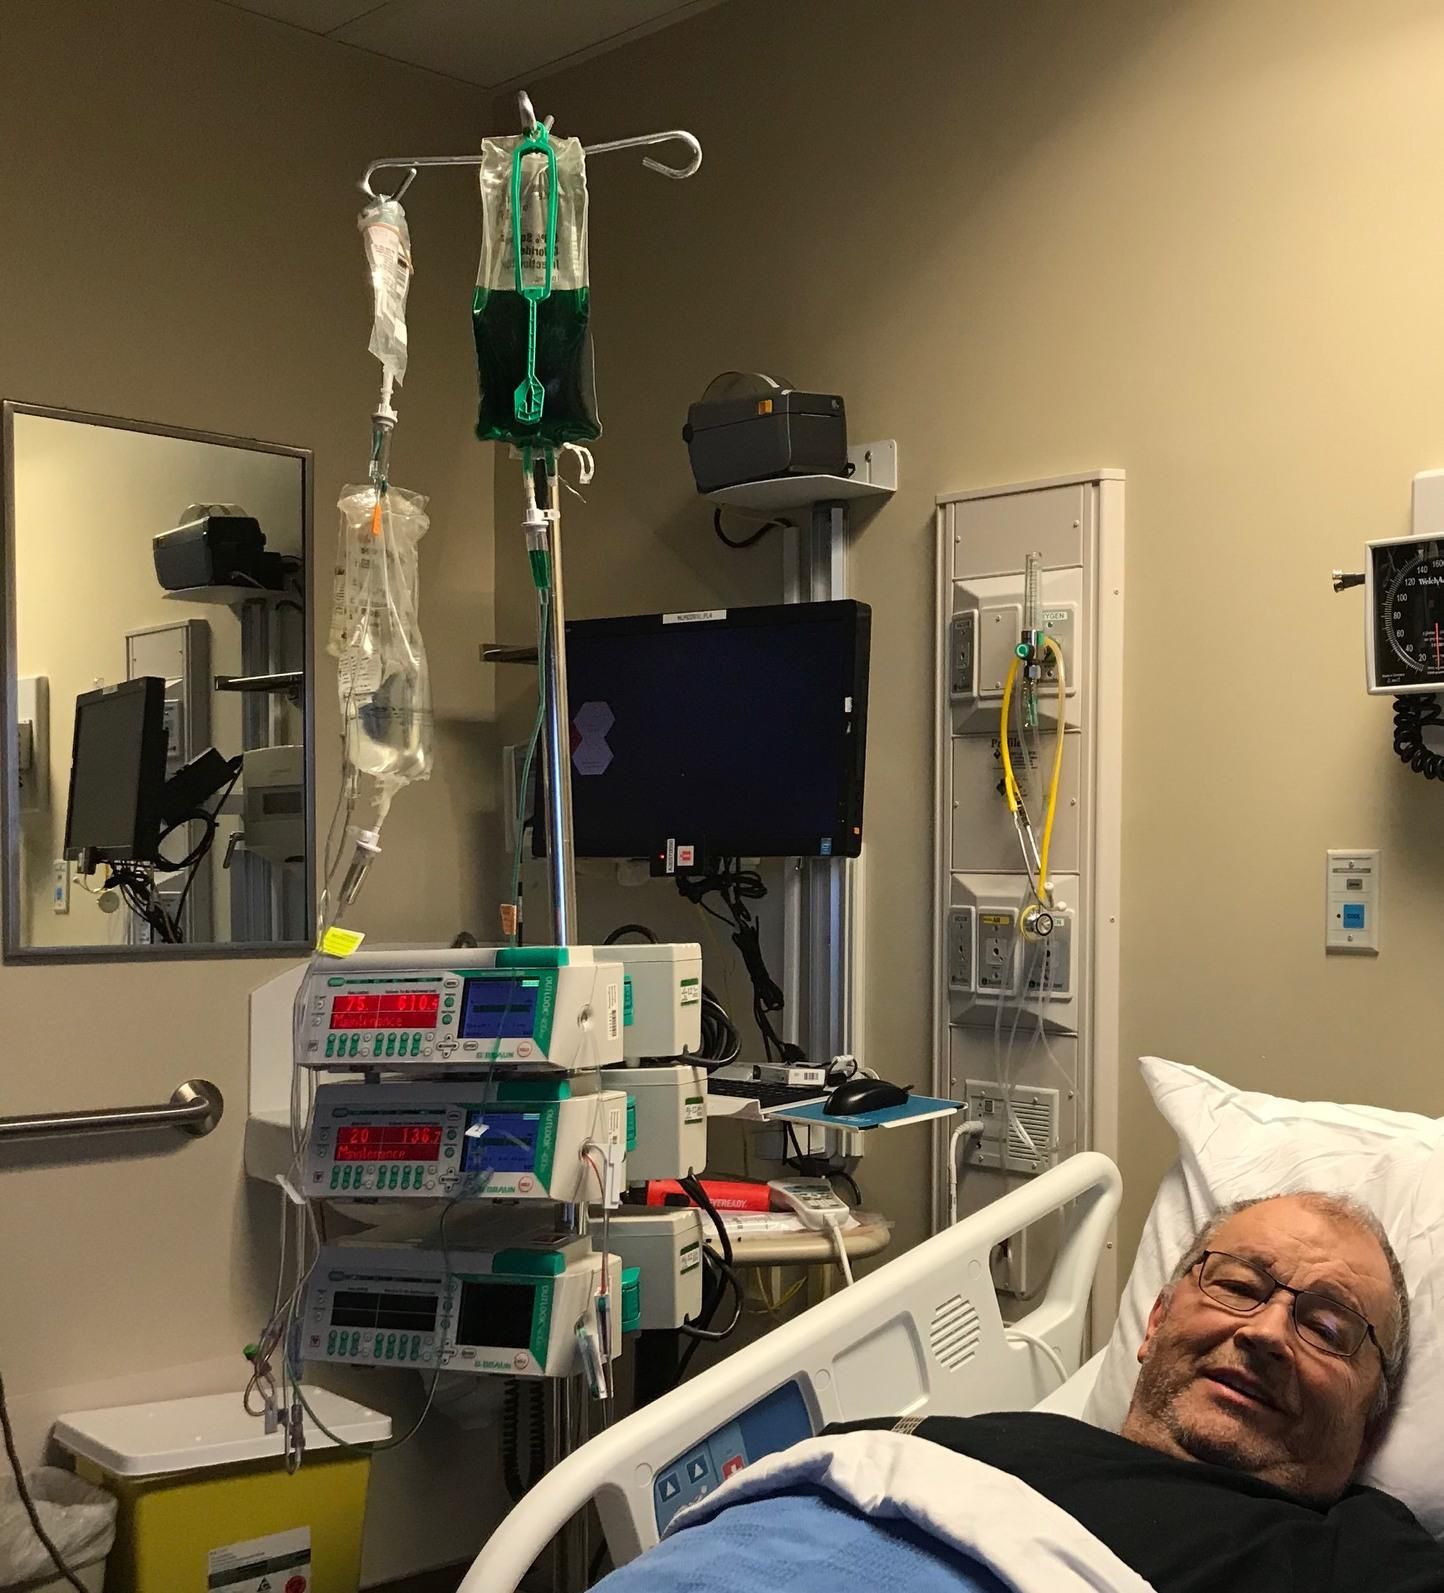 My leukemia afflicted father decided to pull an extremely expensive gag today by cutting open his saline IV bag and dumping green food coloring in it